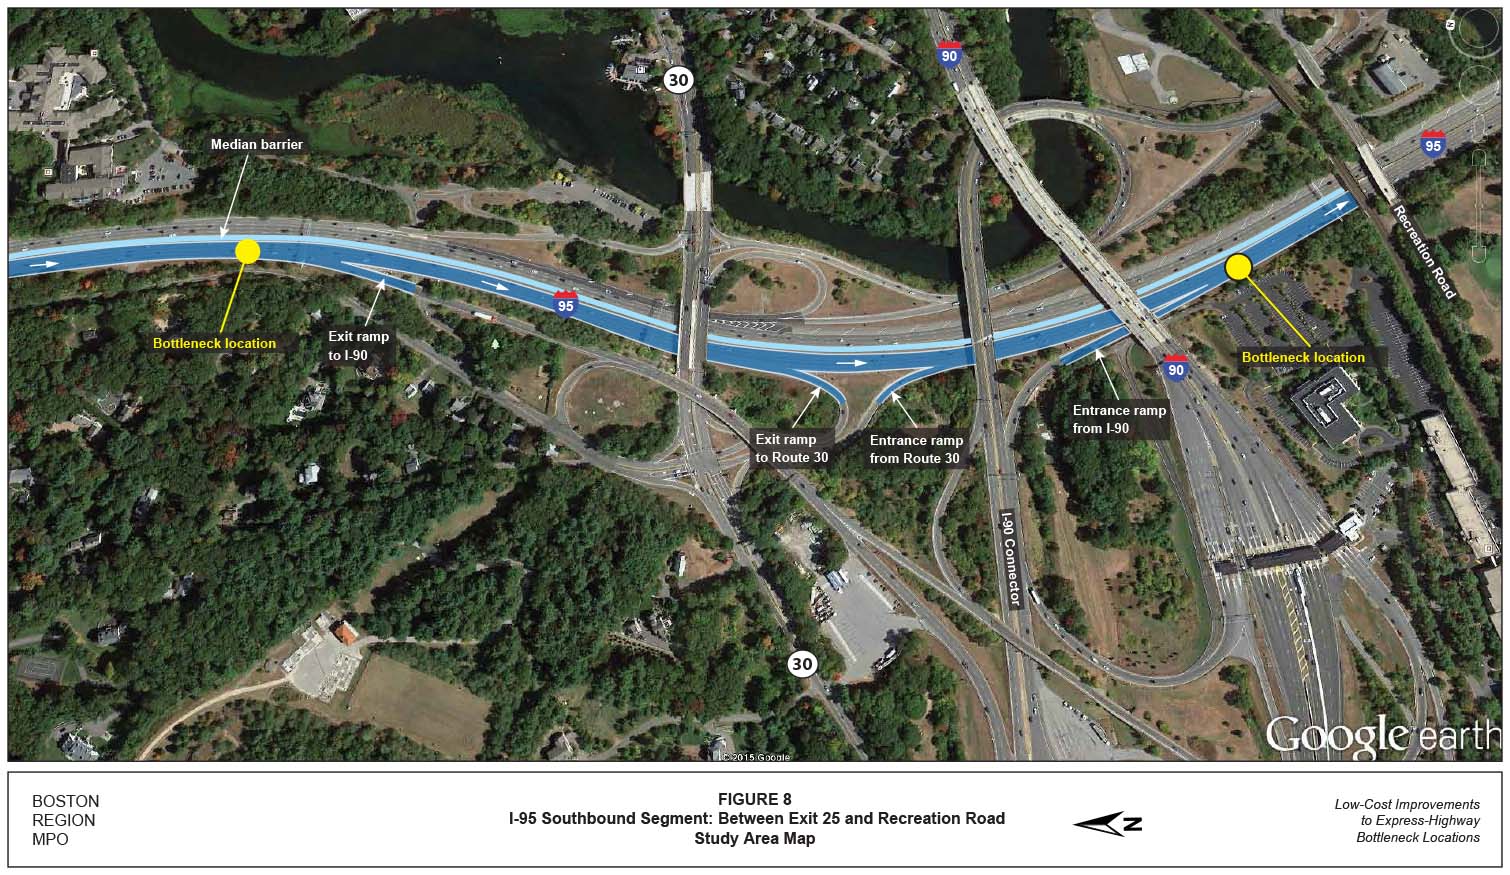 FIGURE 8. Aerial-view map showing the study area on the I-95 southbound segment between Exit 25 and Recreation Road